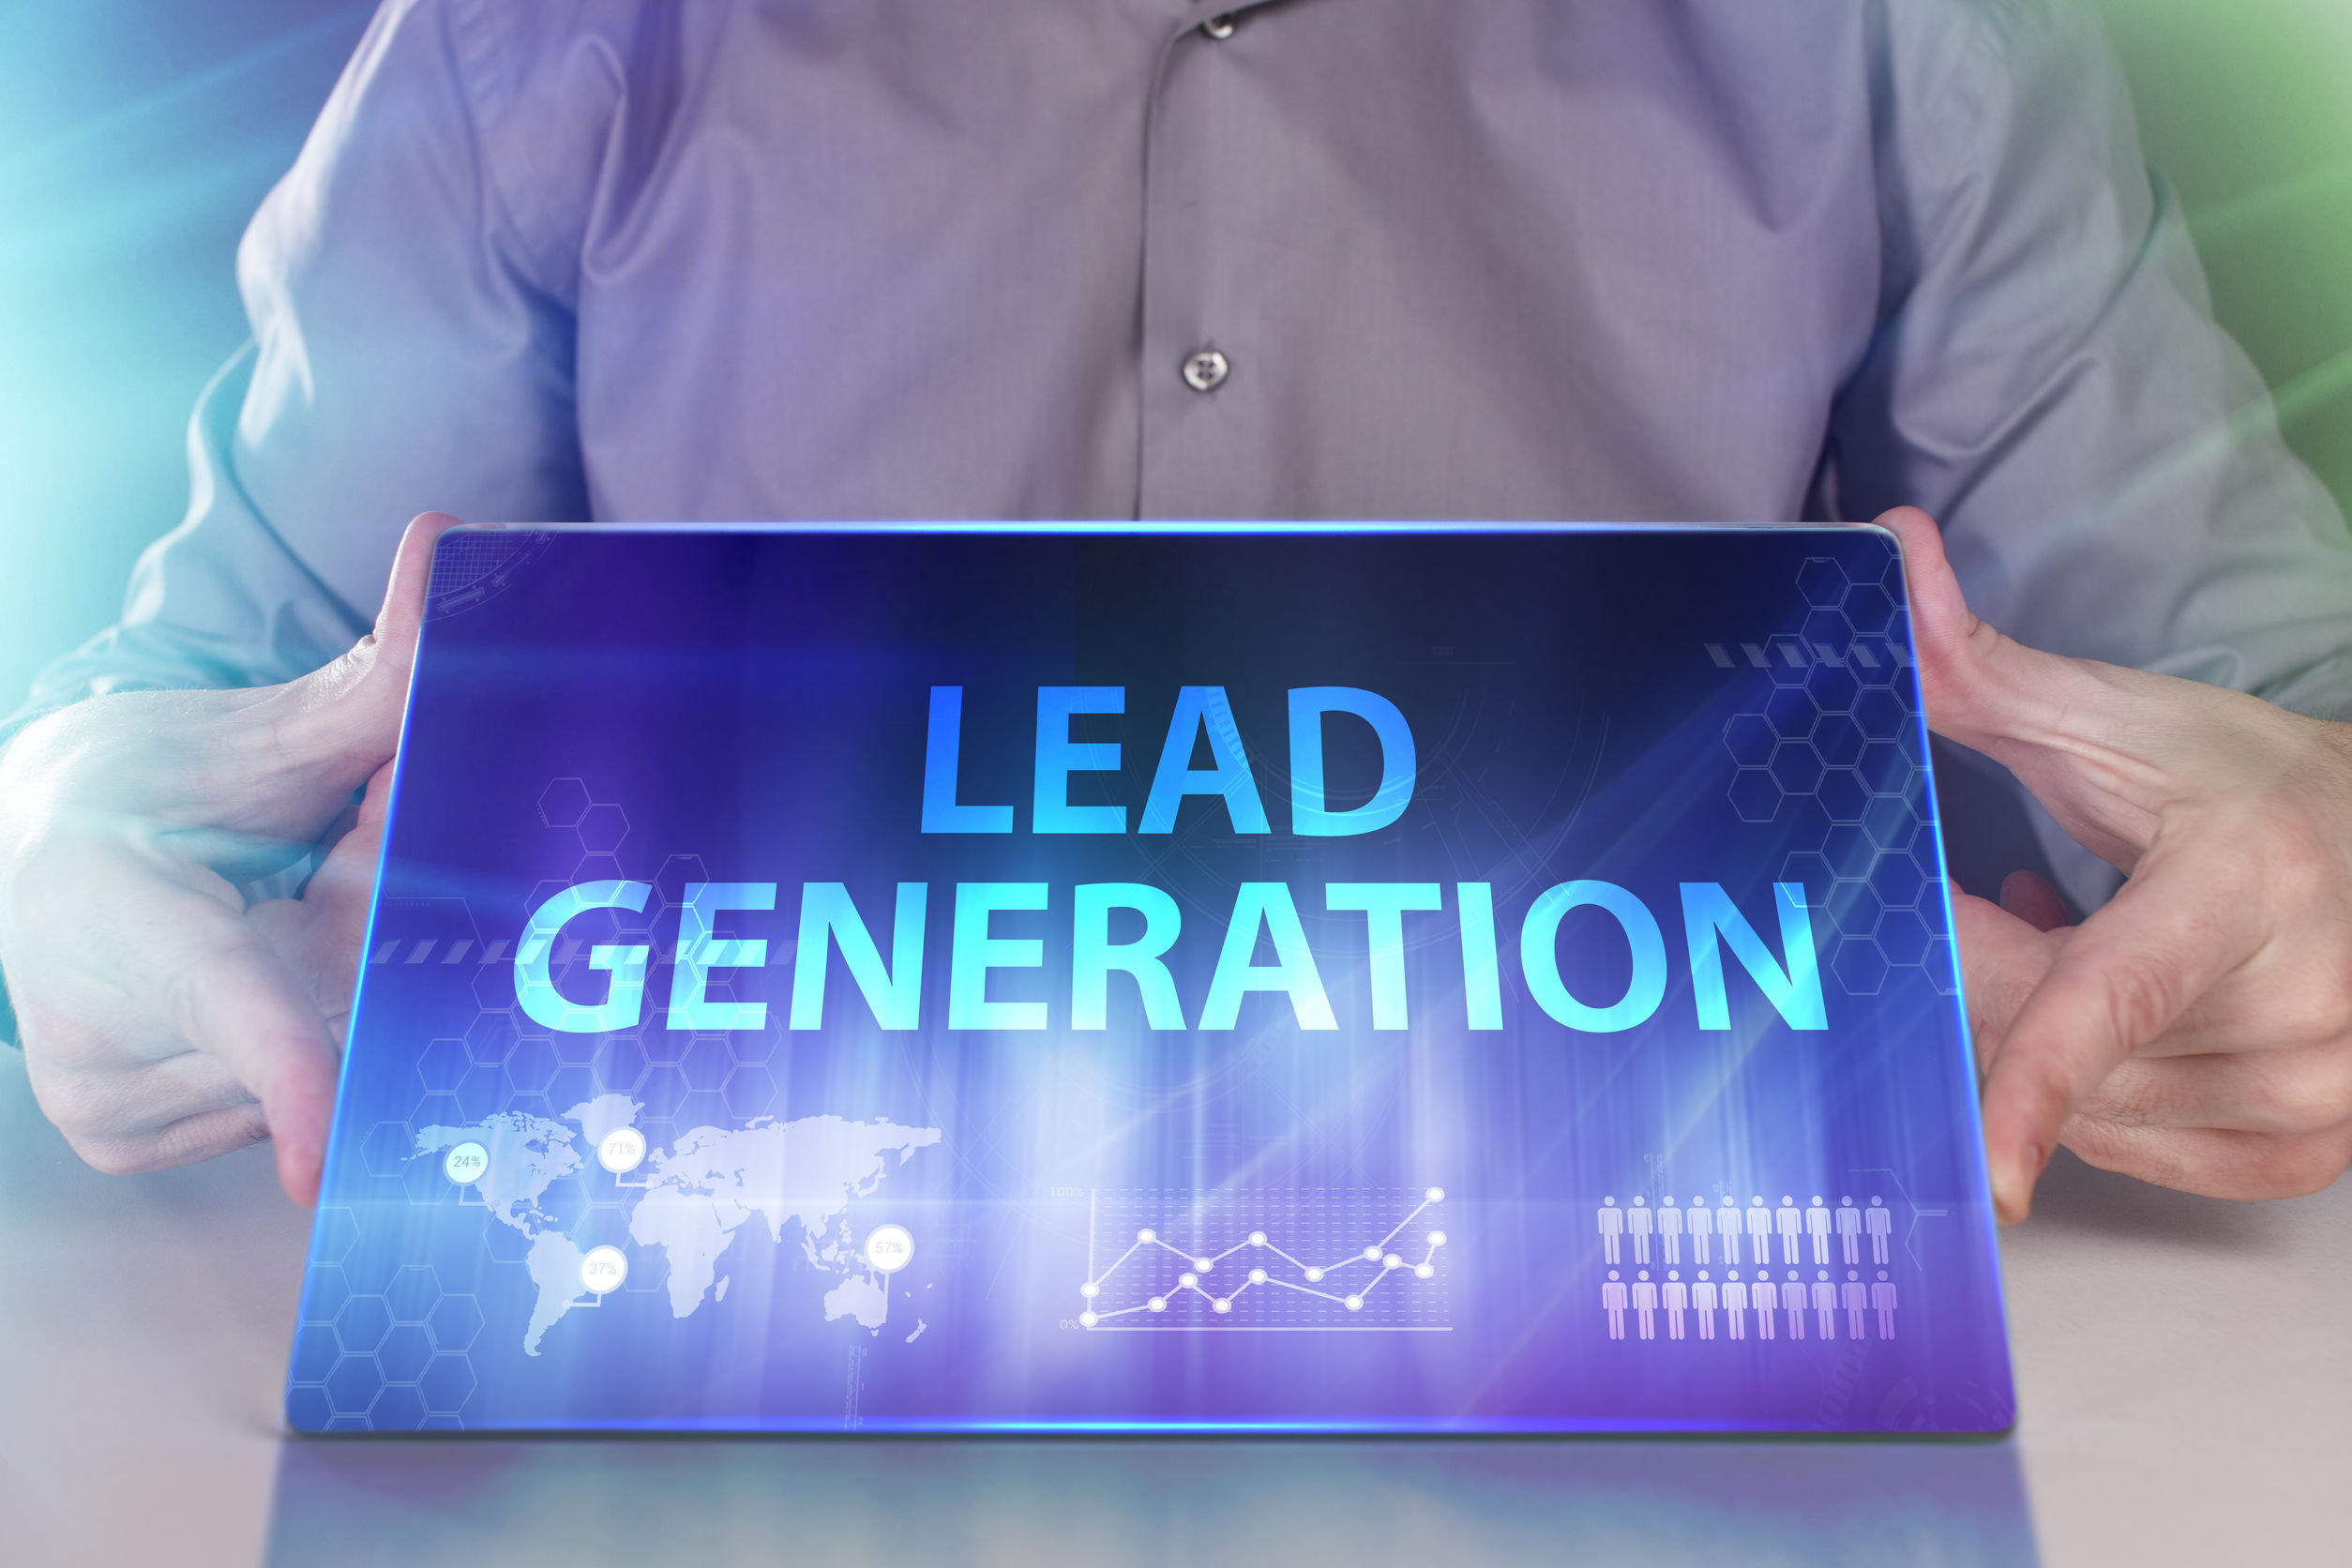 b2b lead generation companies in india, lead generation company in mumbai, lead generation companies in mumbai, lead generation companies in delhi, lead generation services in delhi, lead generation companies delhi, lead generation agency india, seo lead generation services, lead generation agency in mumbai, lead generation in india, lead generation company in noida, top lead generation companies in india